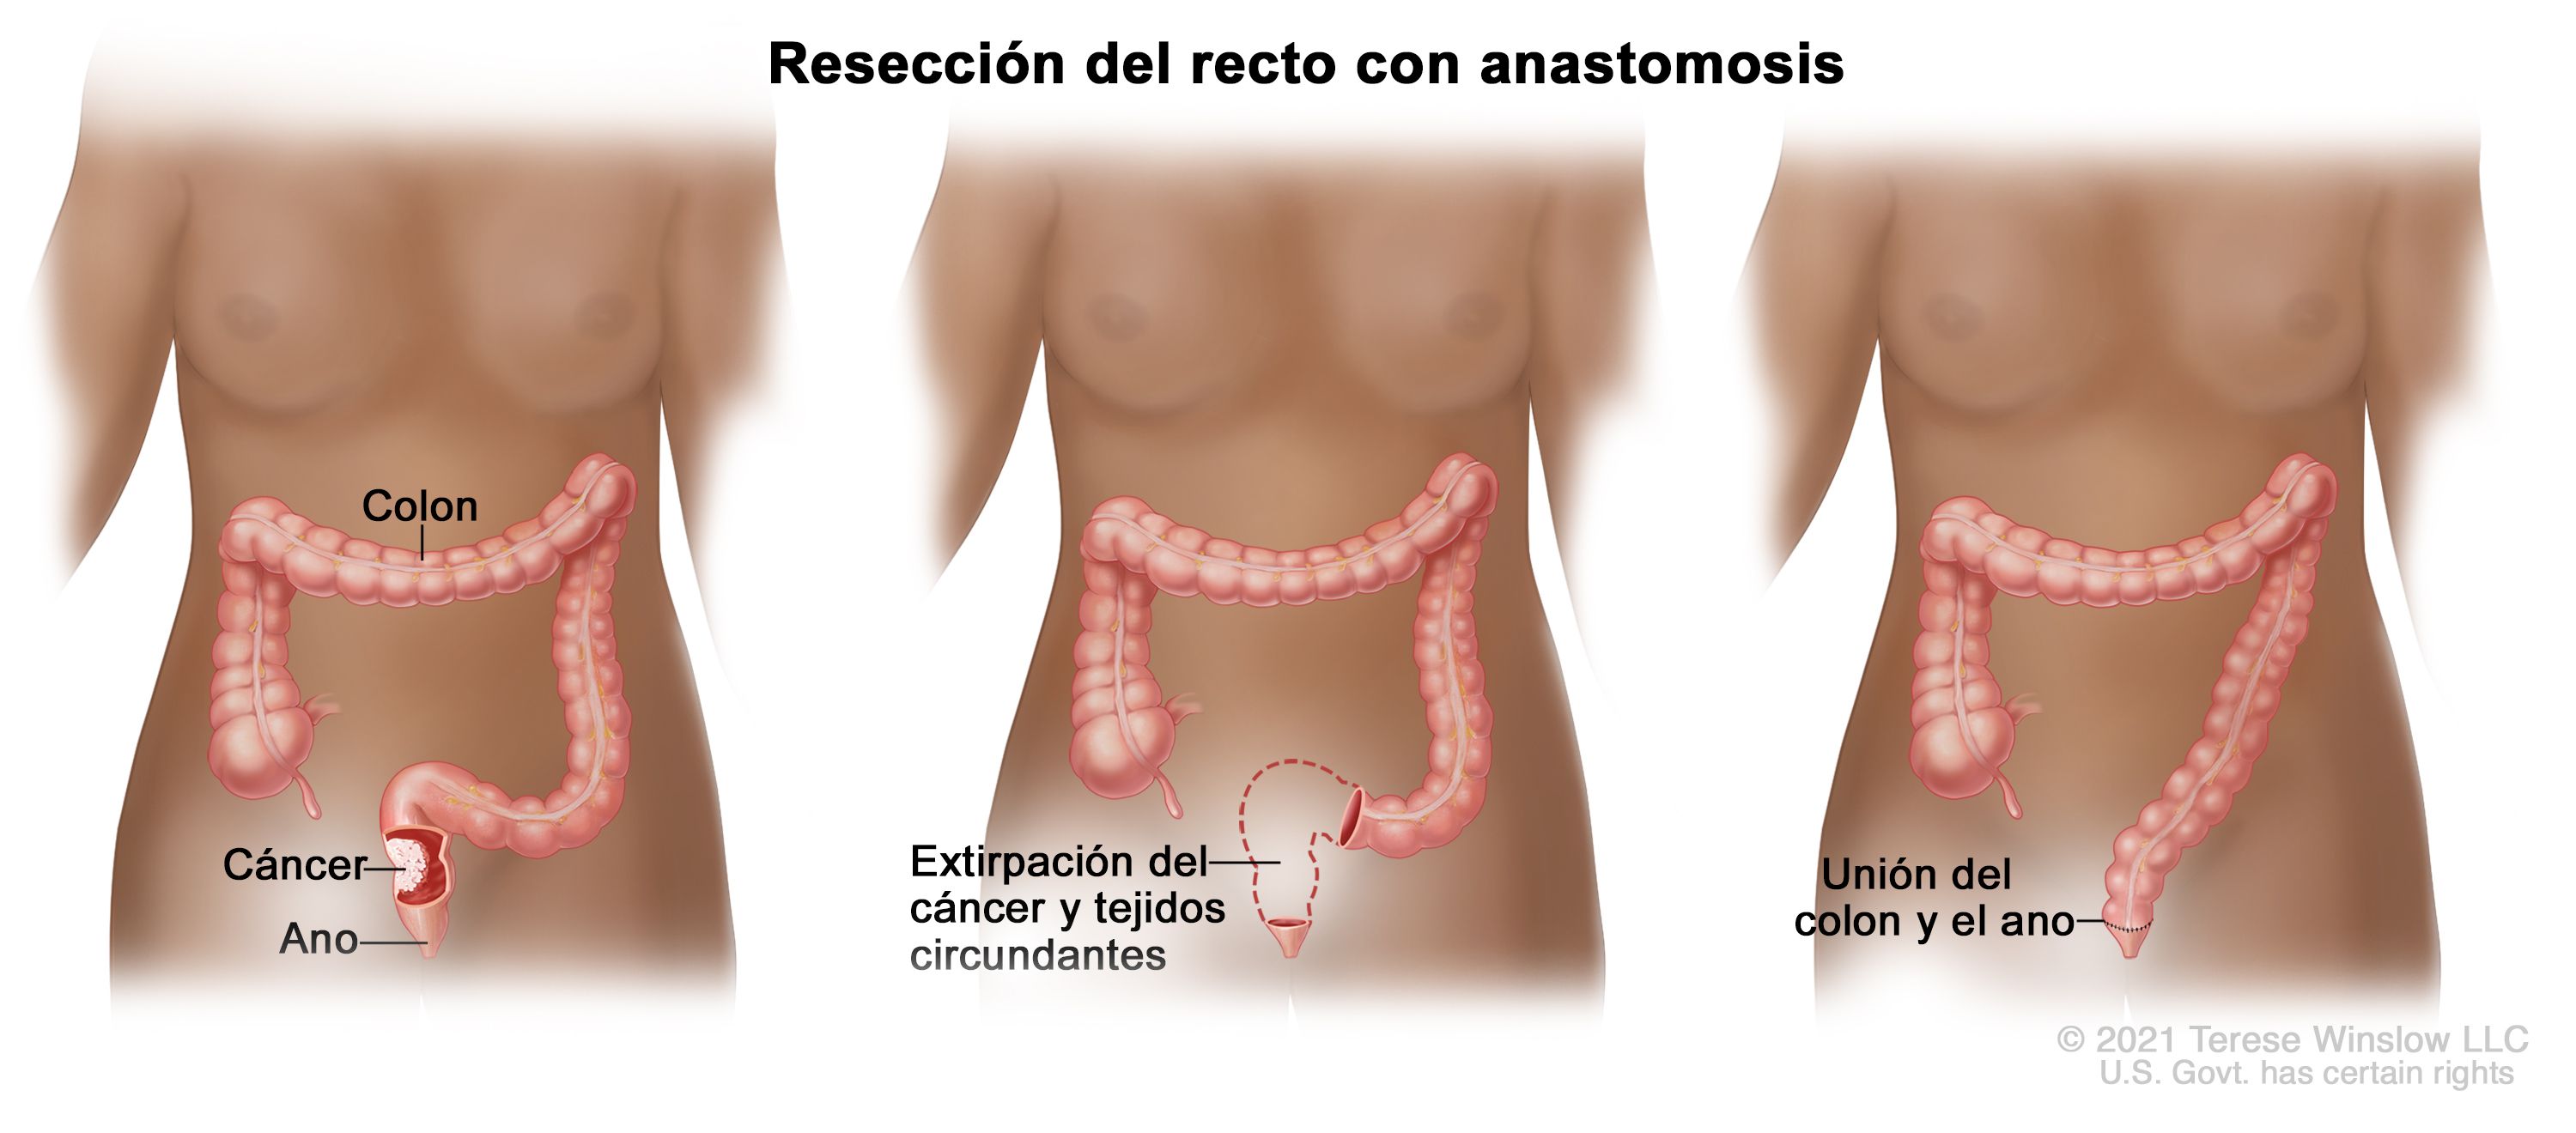 cancer rectal tratamiento